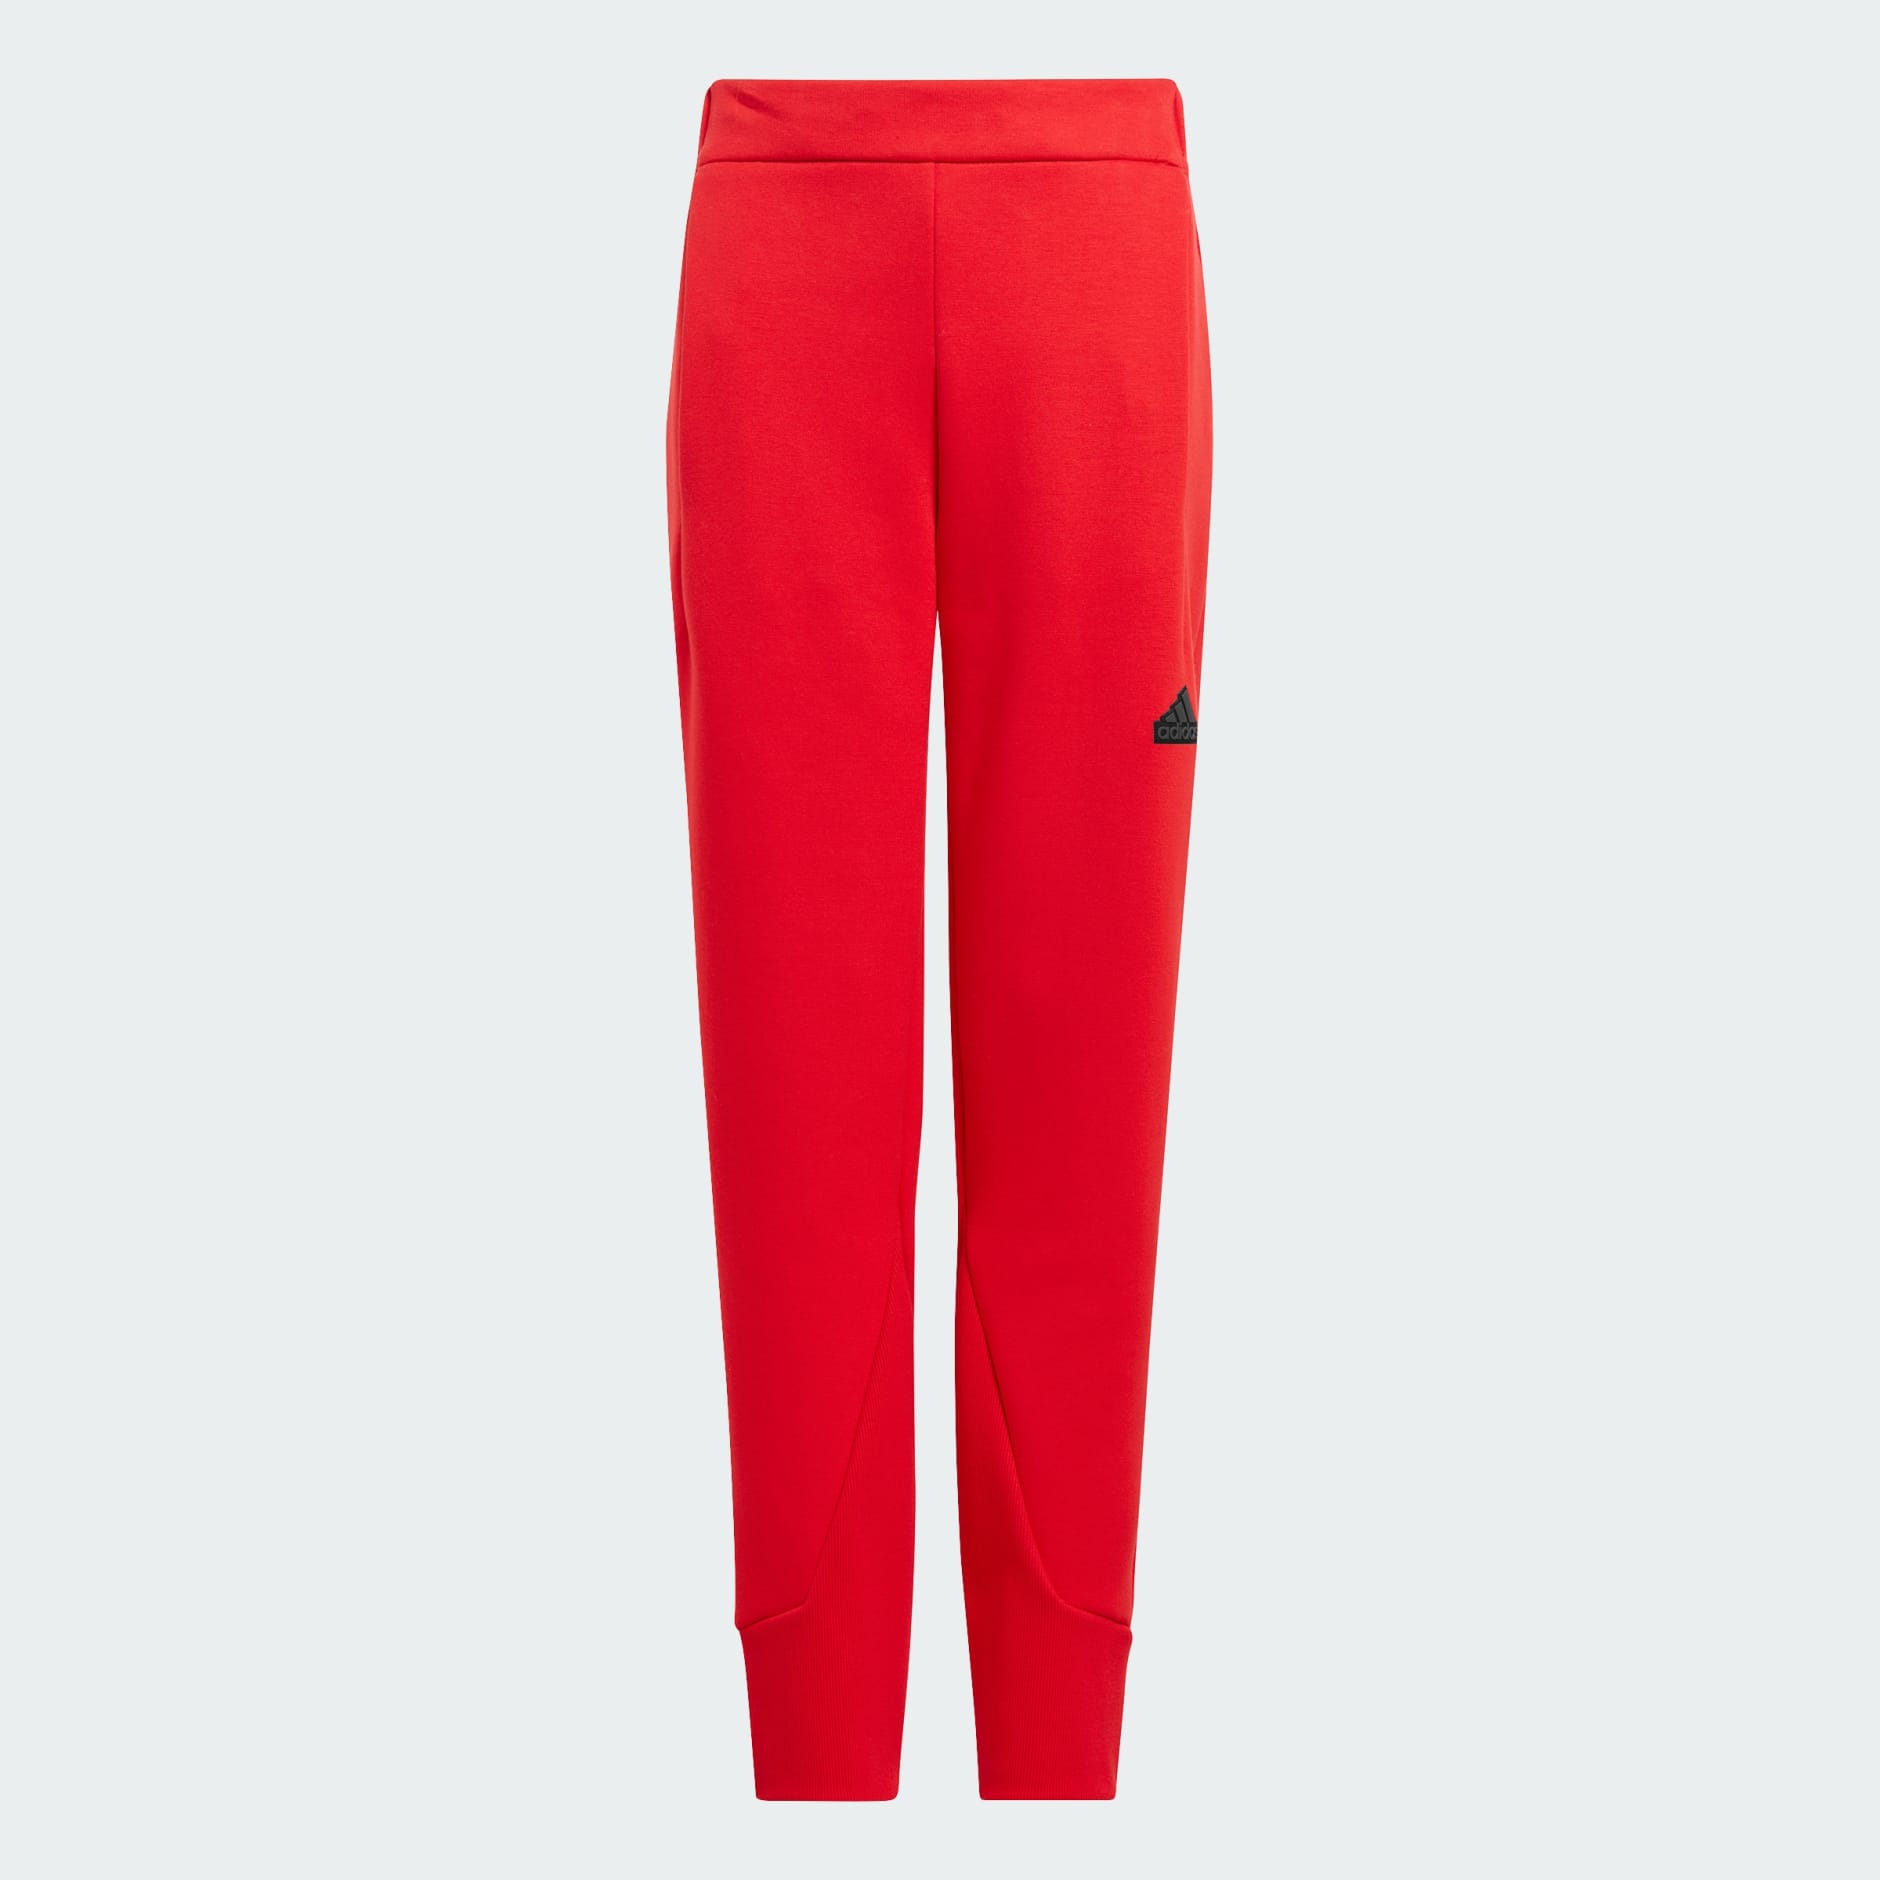 Clothing - adidas Z.N.E. Pants Kids - Red | adidas South Africa